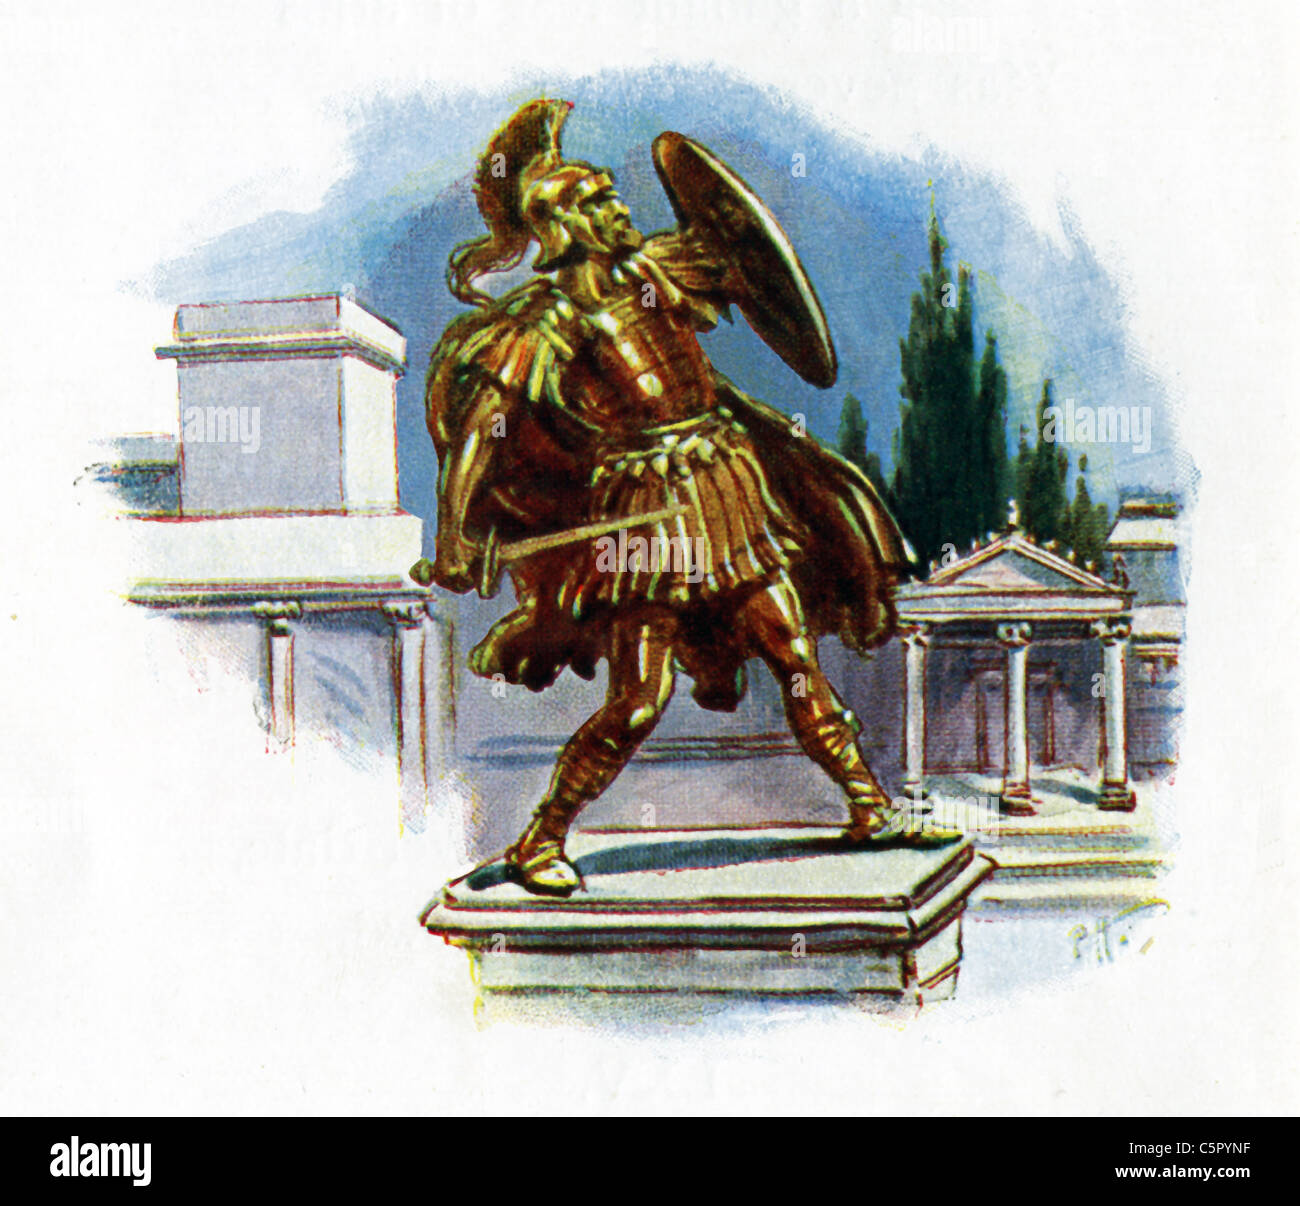 This illustration of a sculpture of a Roman soldier in the city of Rome is from an 1864 copy of Macaulay's Lays of Ancient Rome. Stock Photo